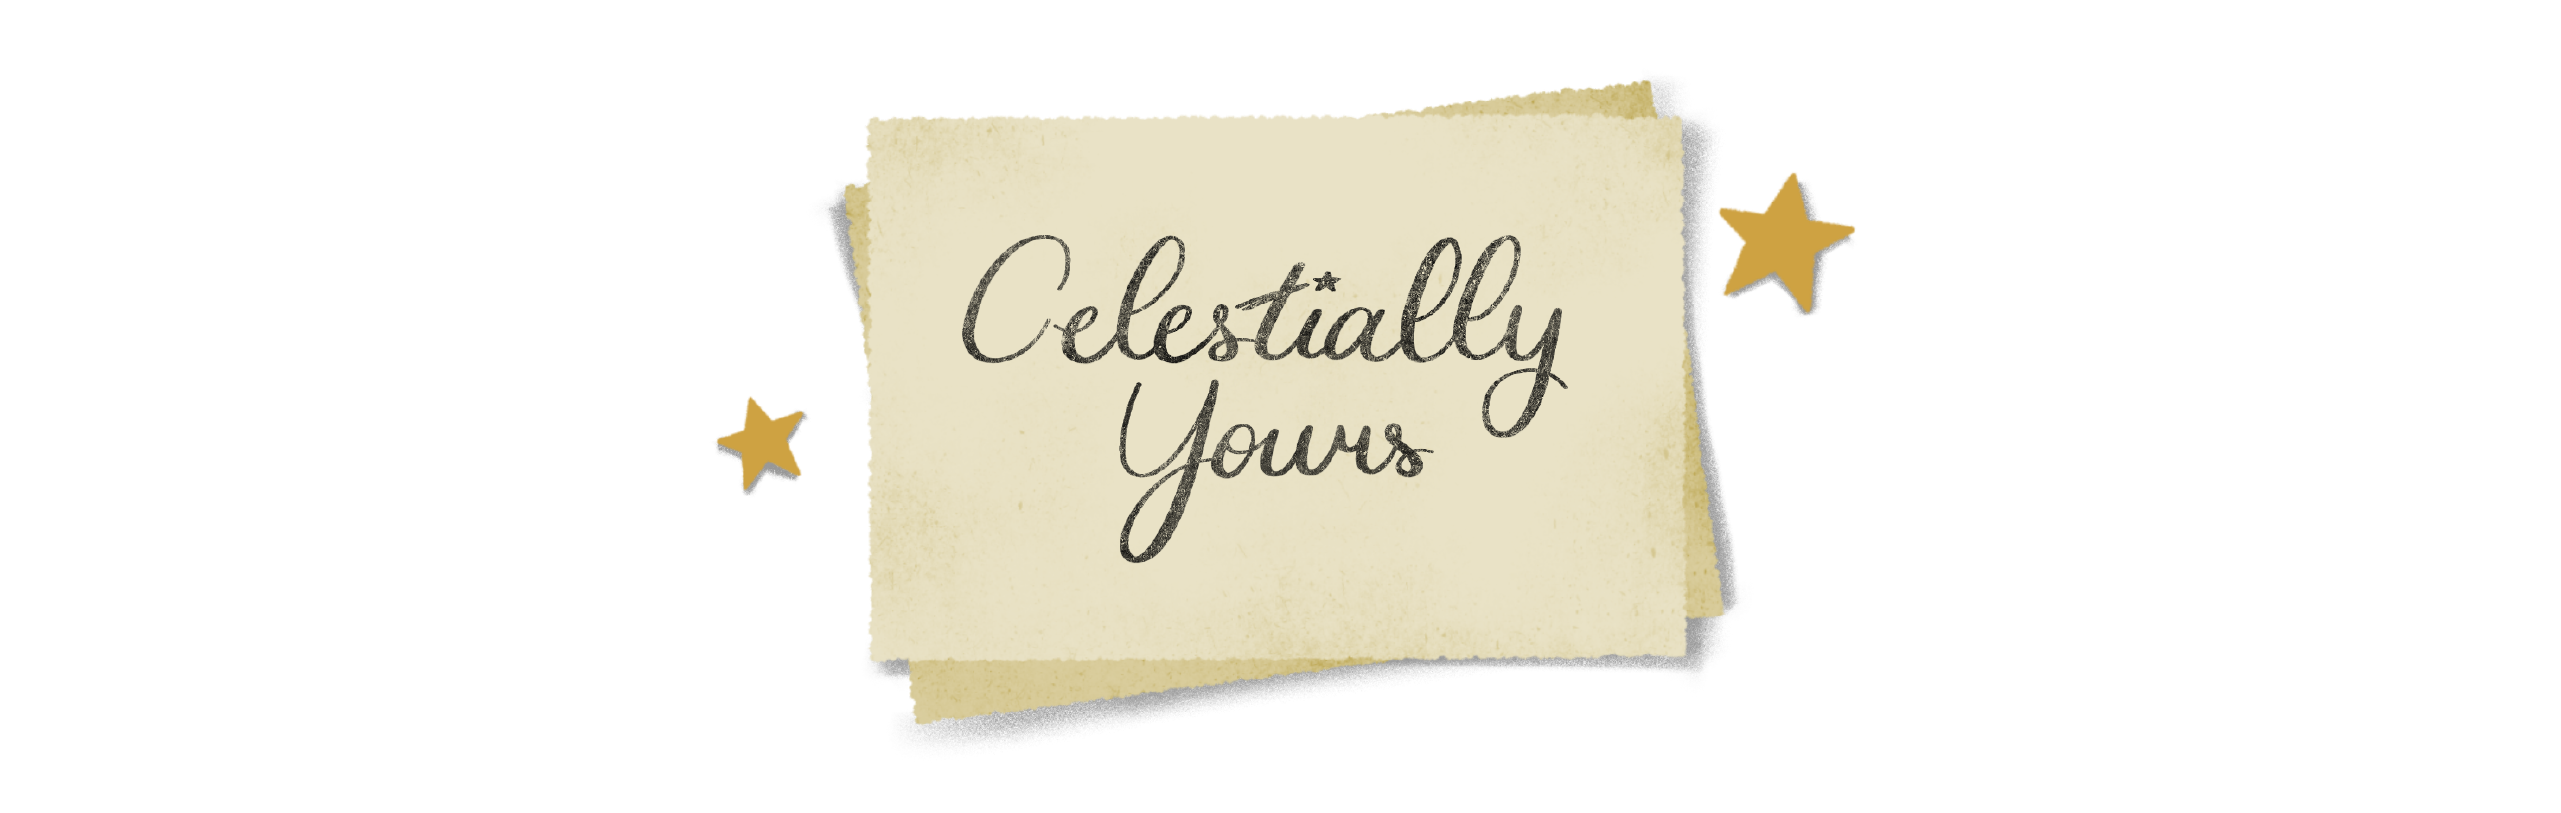 Celestially Yours